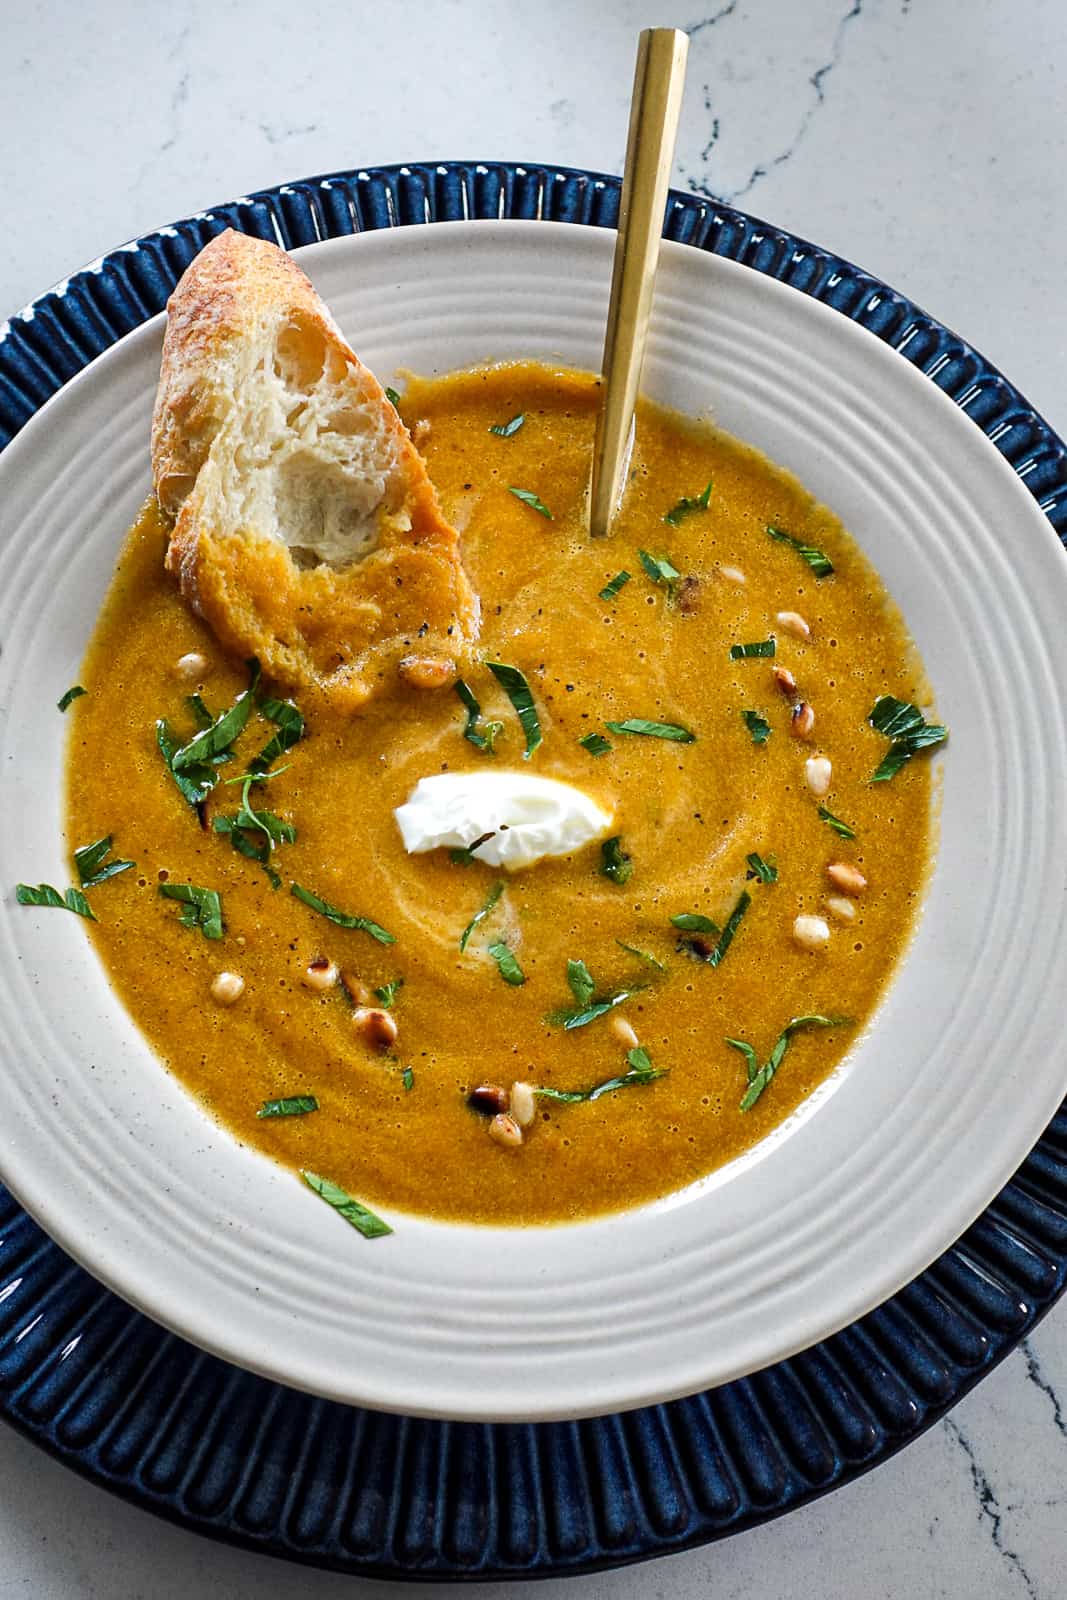 Toasted Pine Nuts Topping on Carrot Soup